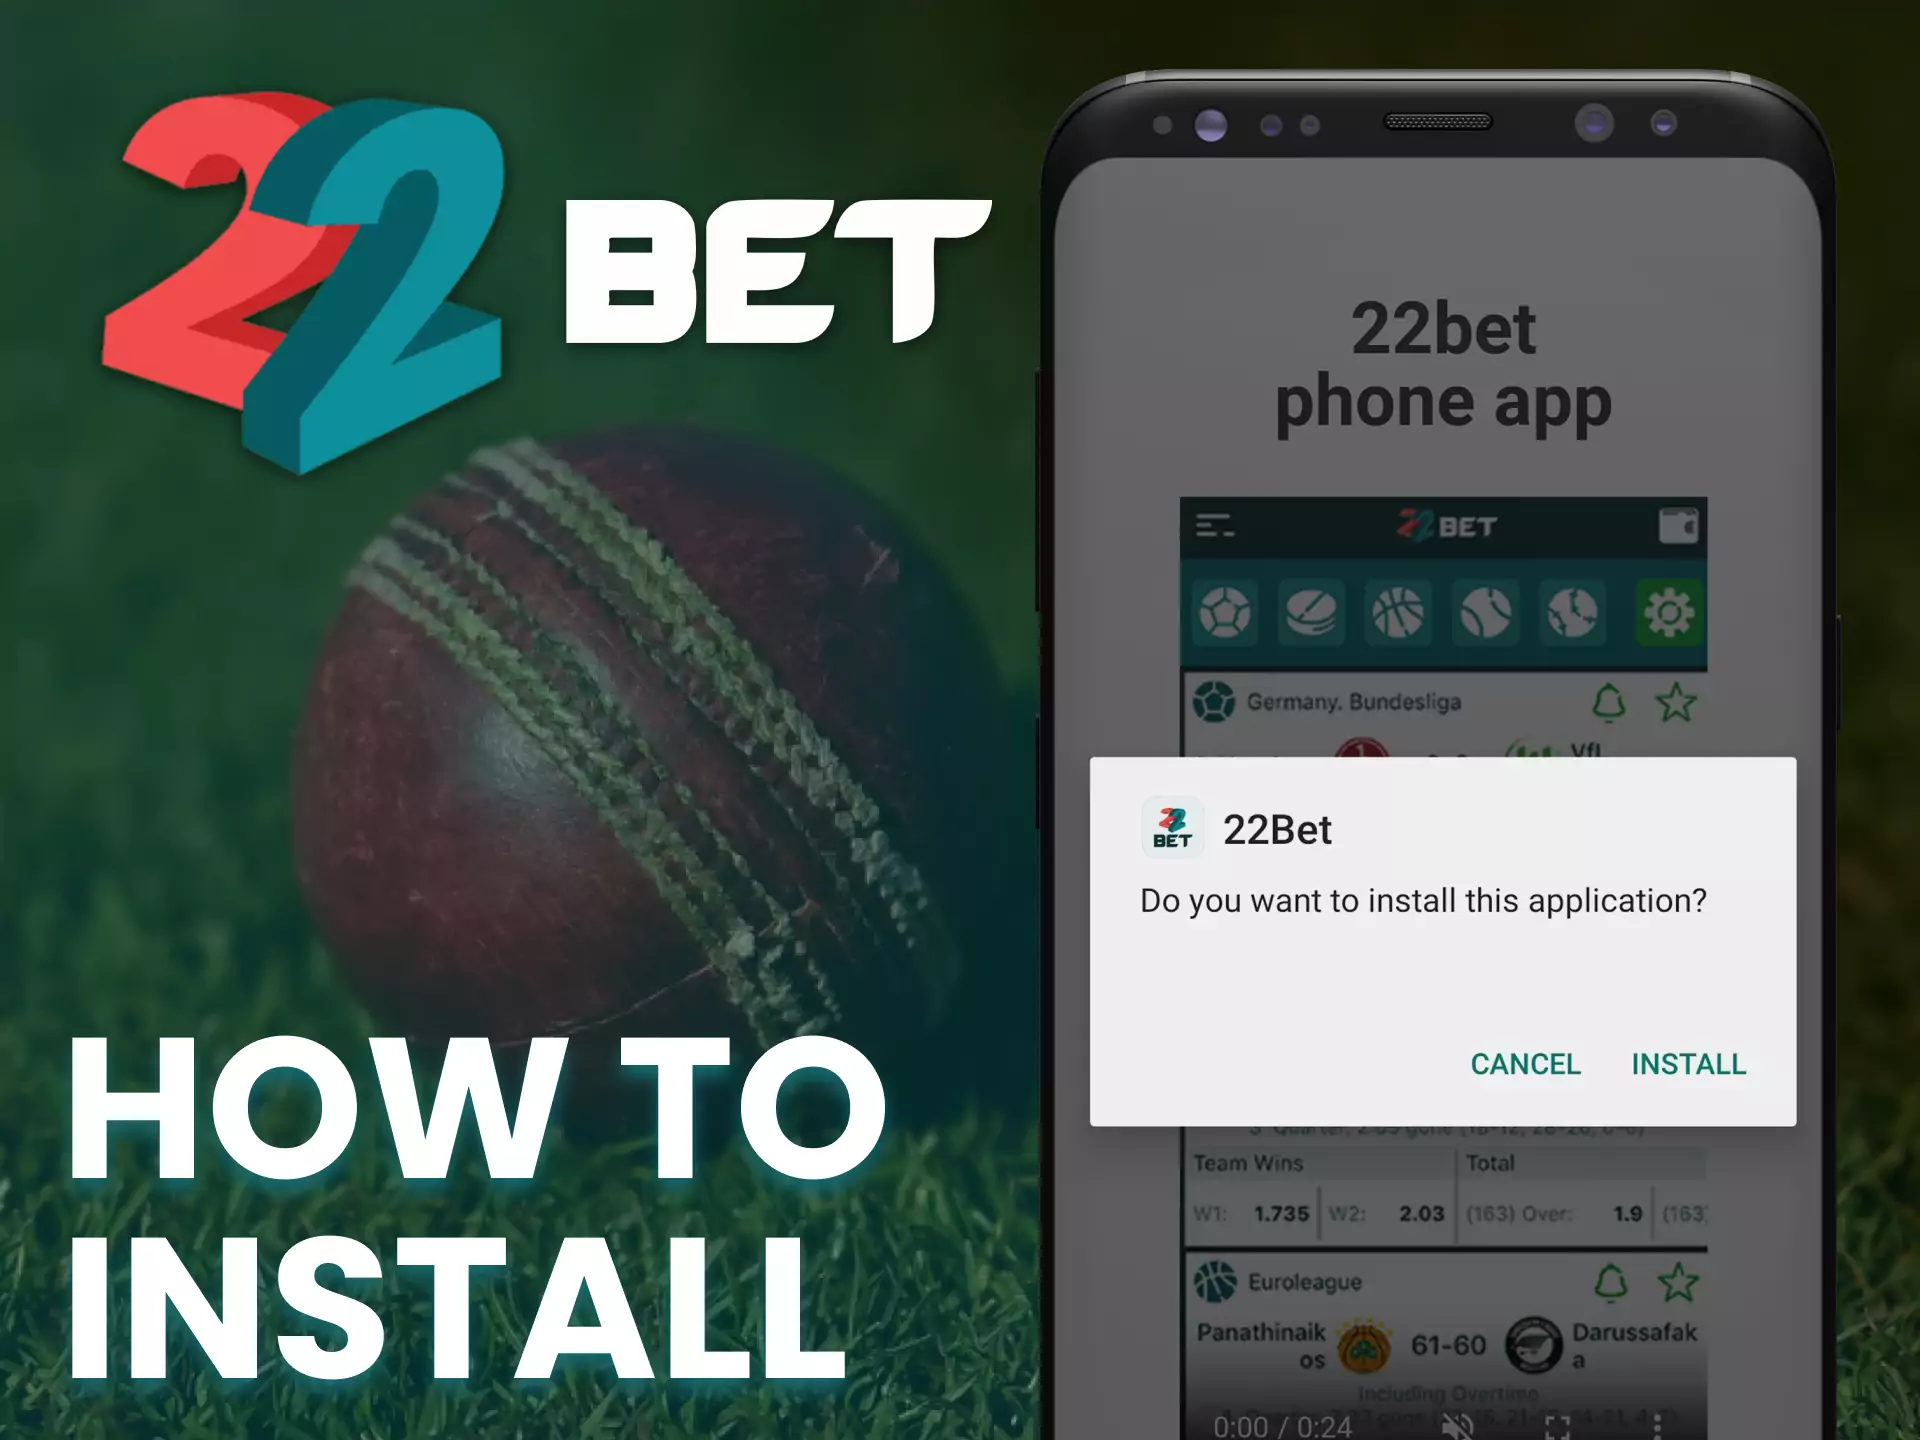 Find out how easy it is to install the 22bet app on your phone.